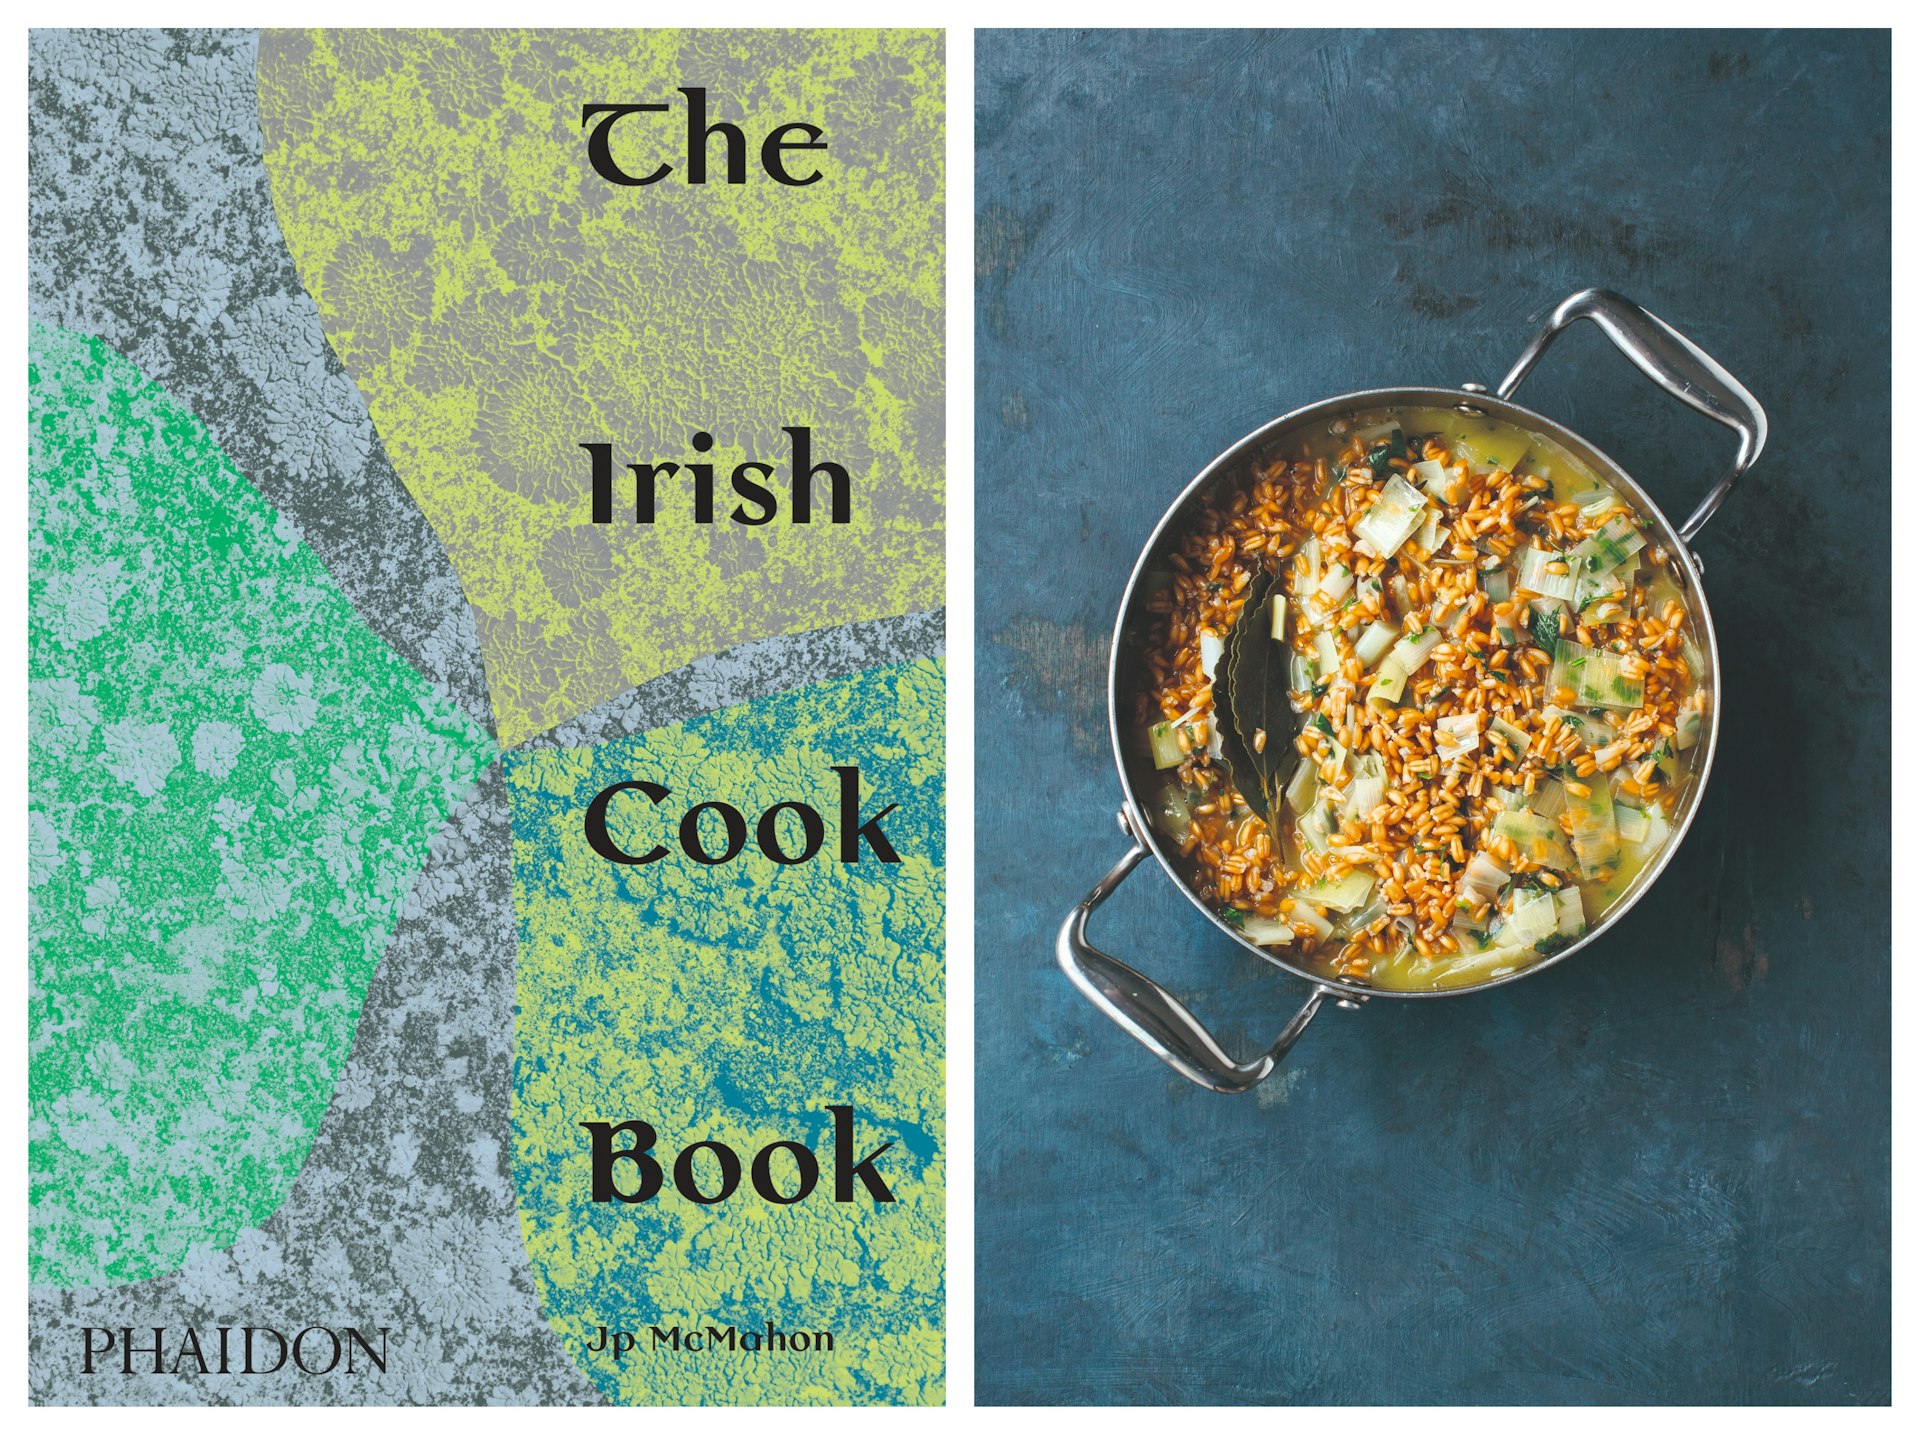 On the left a cover from the Irish Cook Book, on the right a bowl of spelt leeks on a blue background.